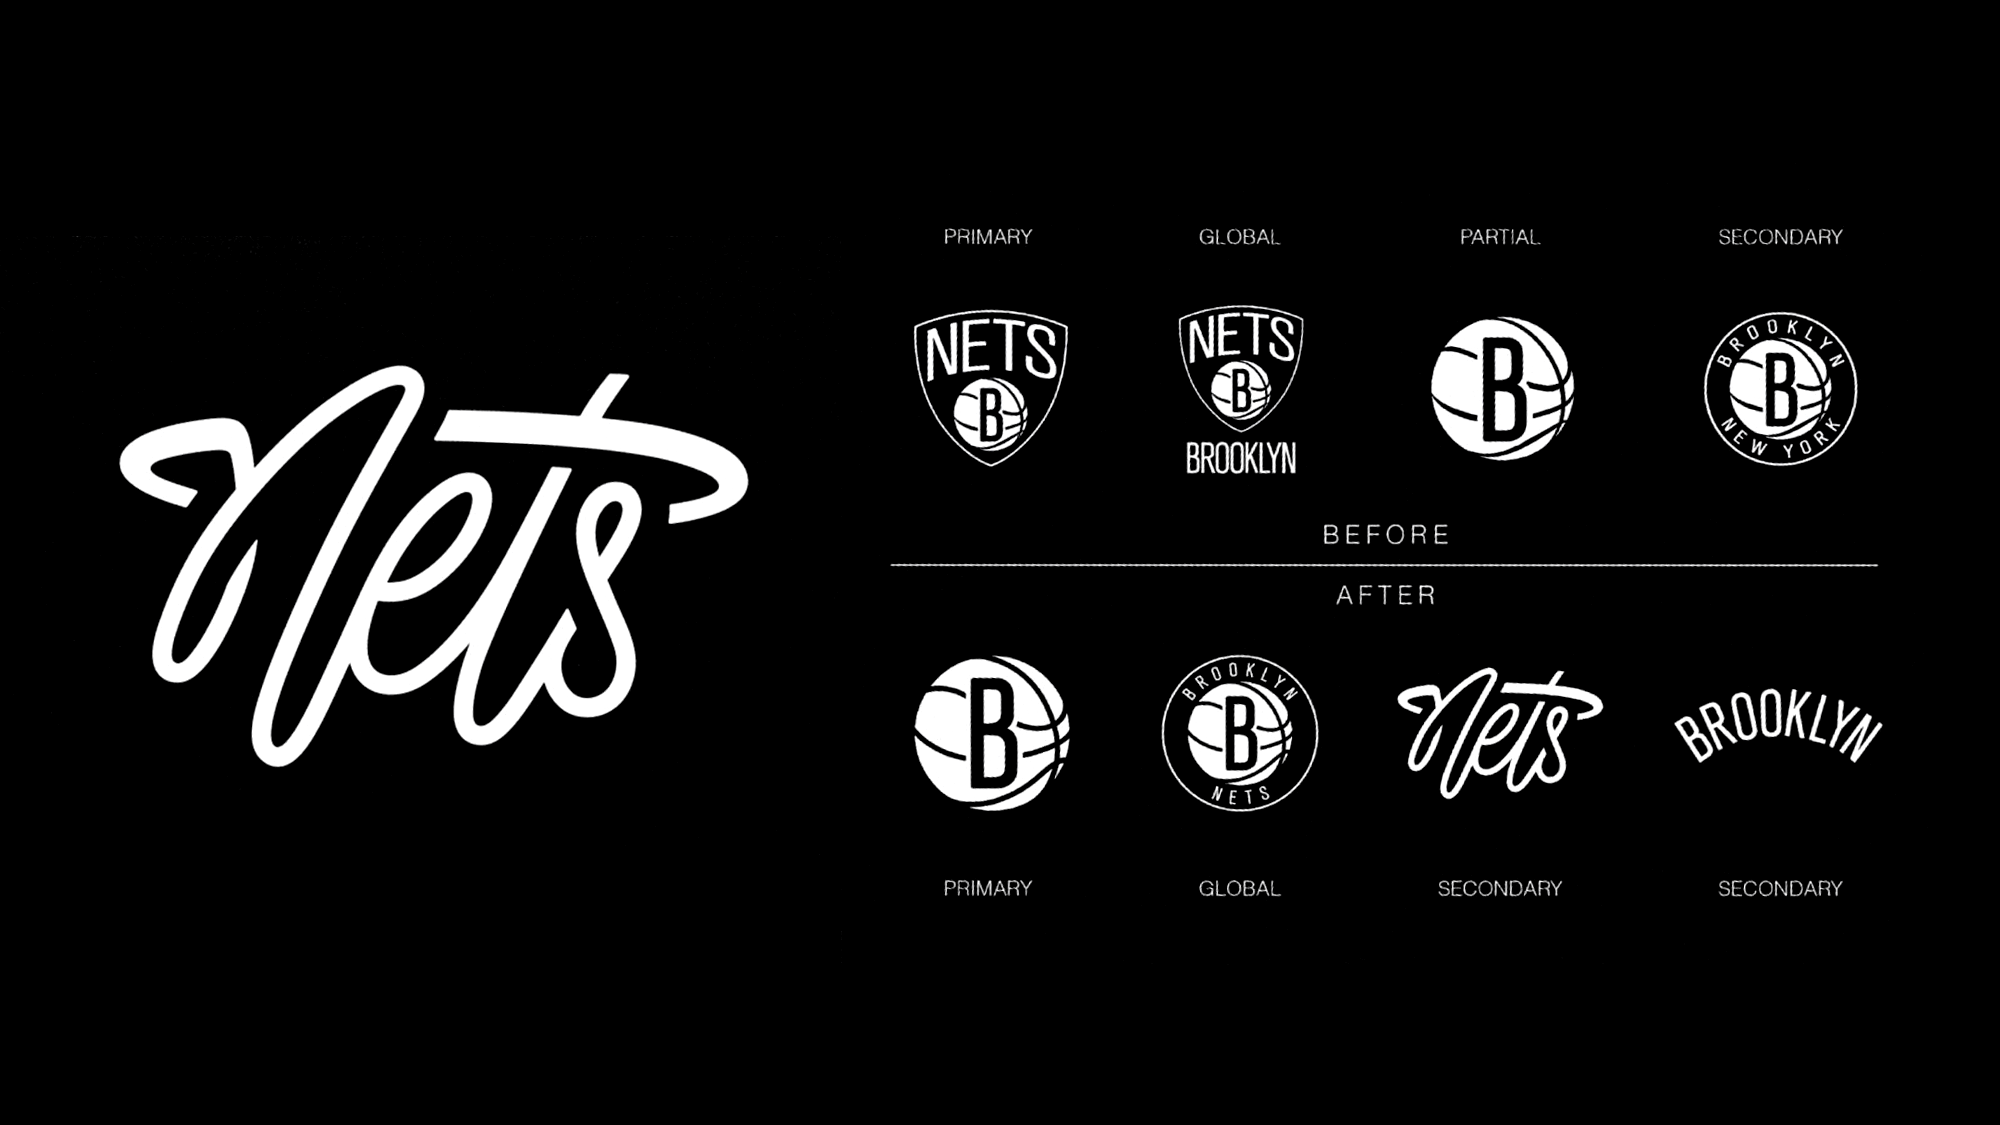 Nothing but Nets